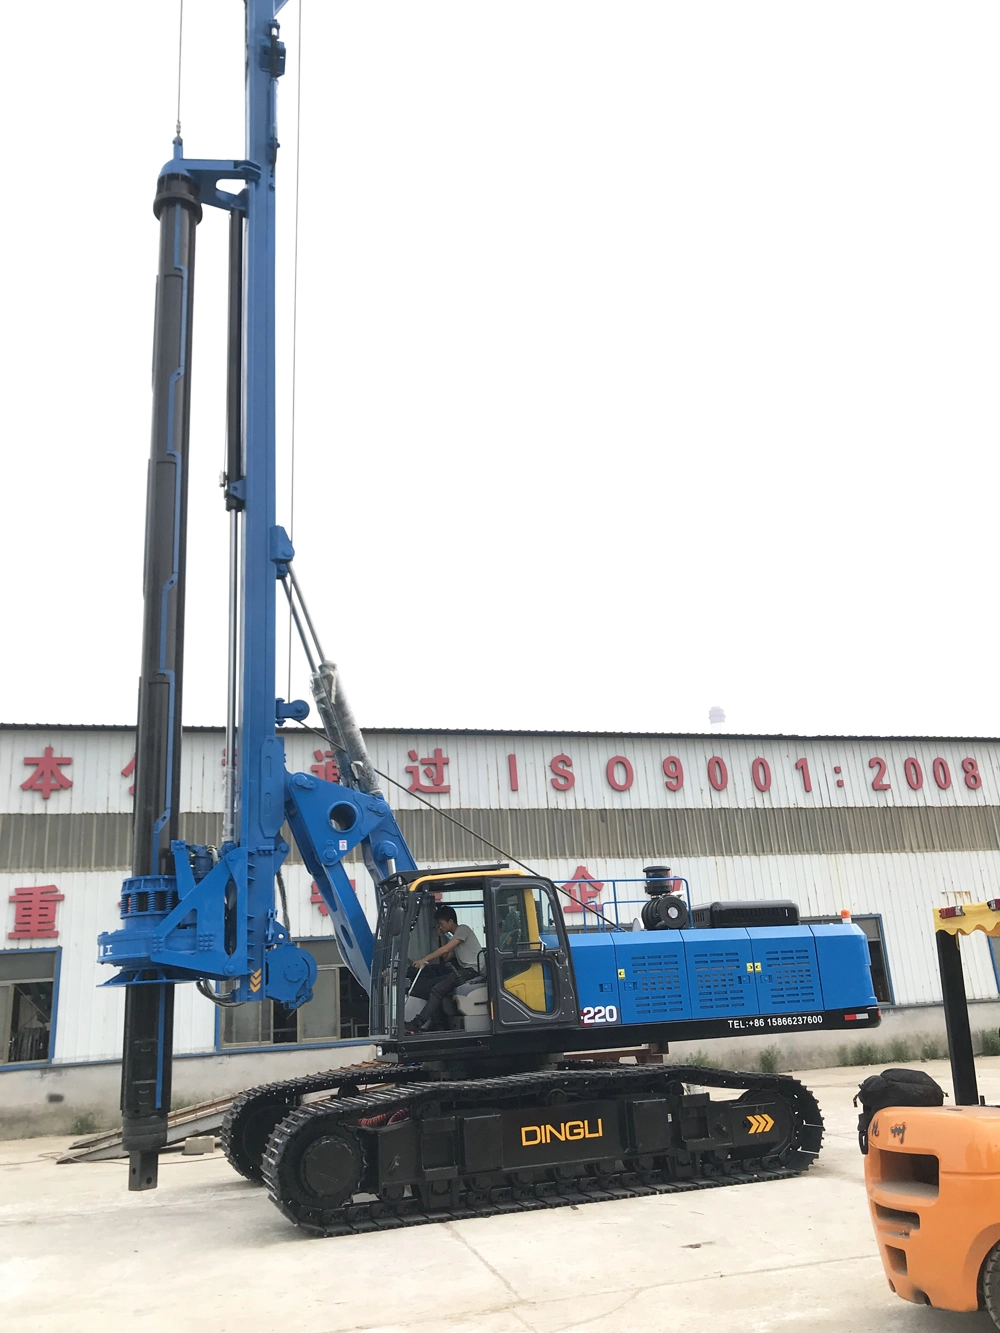 Dingli Produce Dr-220 Rotary Drilling Rig Machine for Sale Good Price